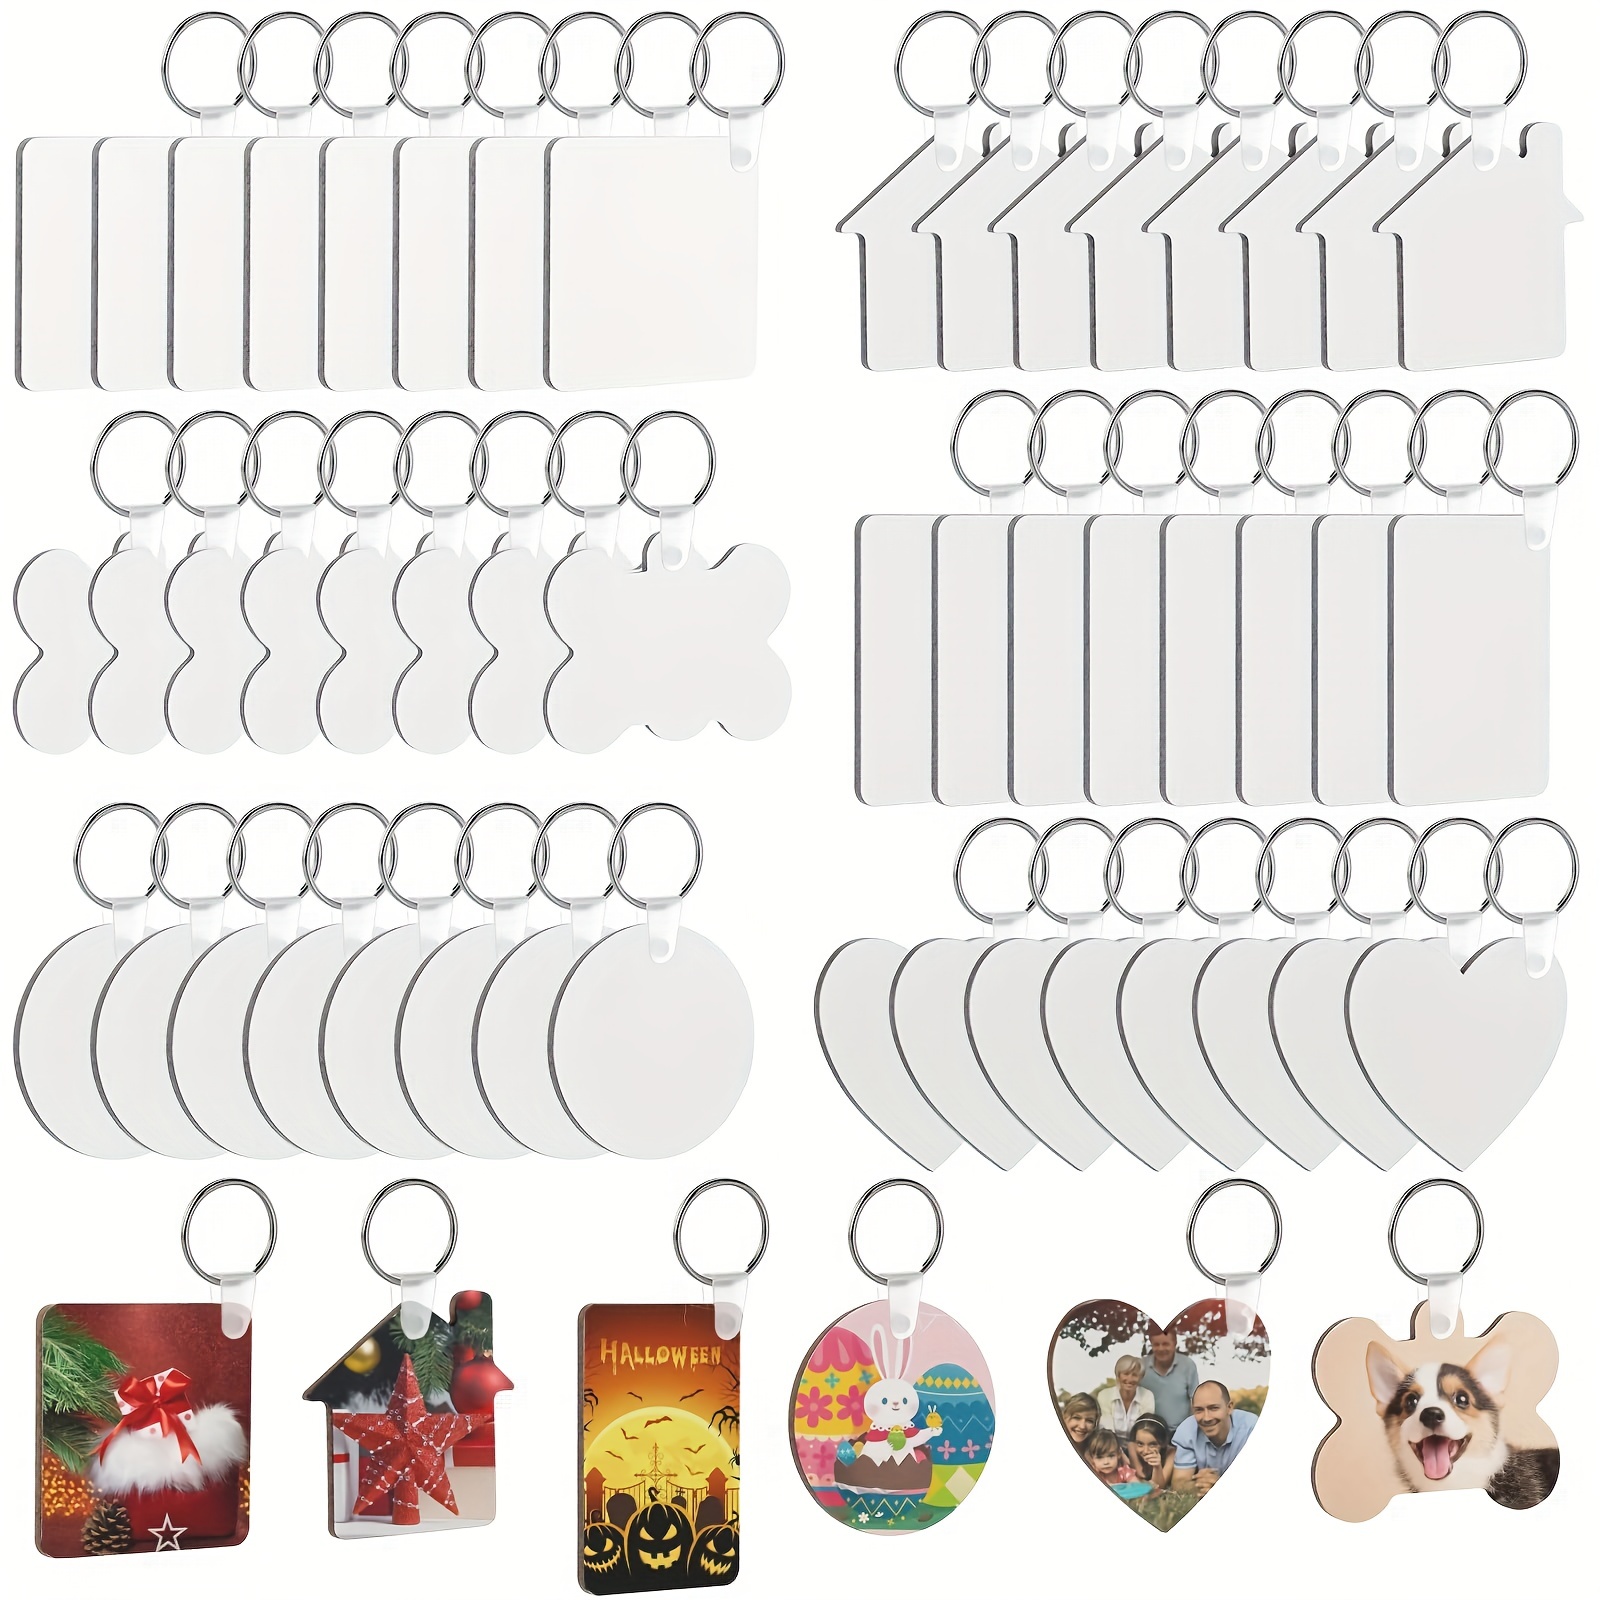 90PCS Sublimation Keychain Blank Heat Press Transfer Double-Side Printed  Keychain Key Ring for DIY Office Tag Art Craft Ornament